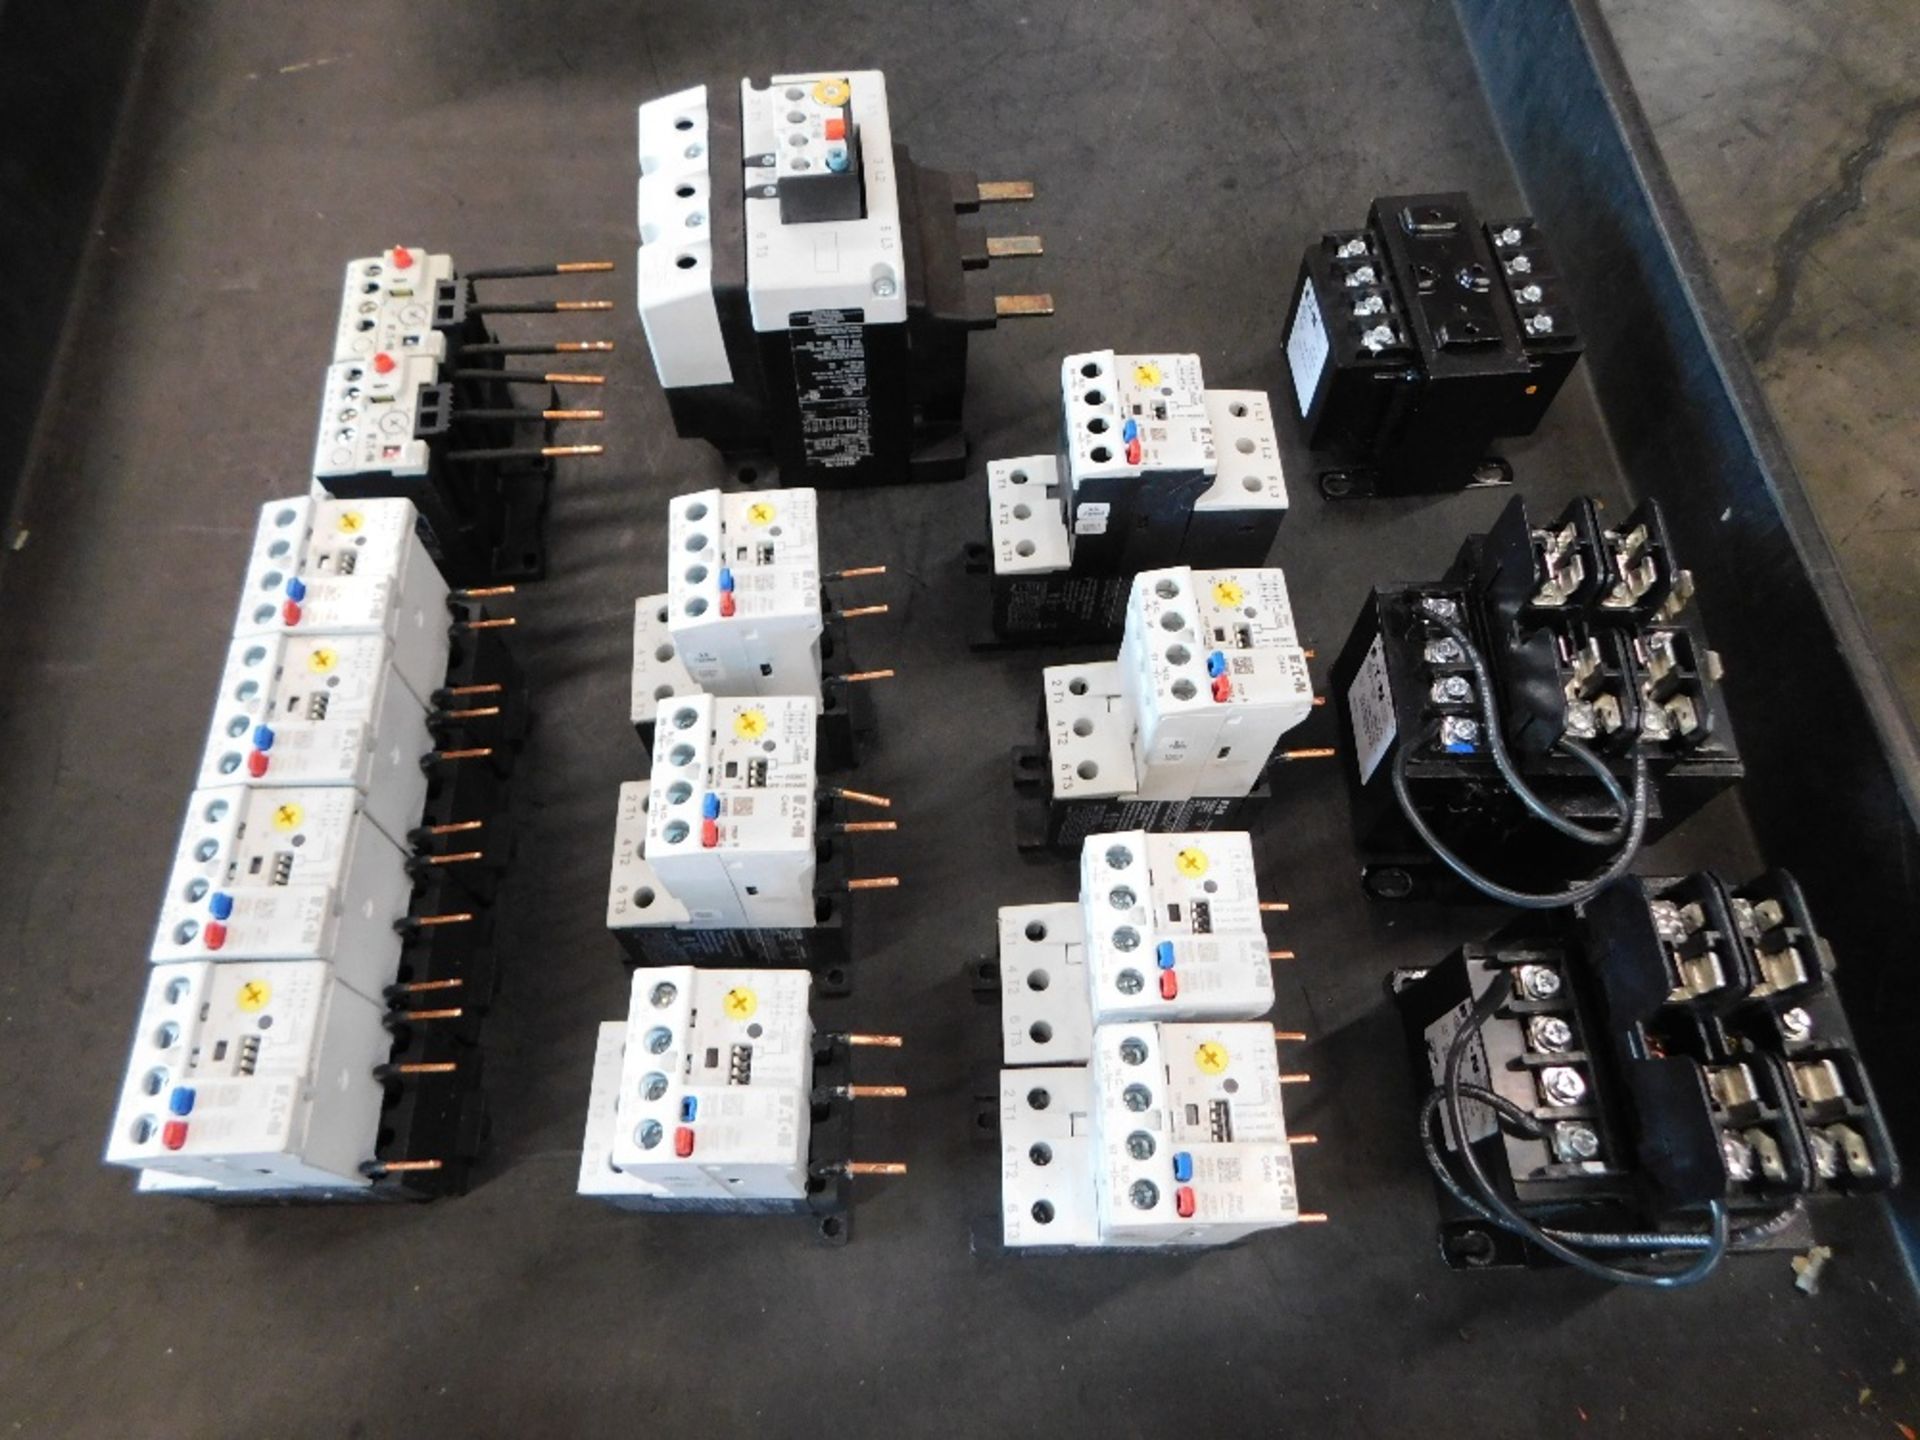 19x Eaton Relays and Transformers - Assorted Models - Image 2 of 4